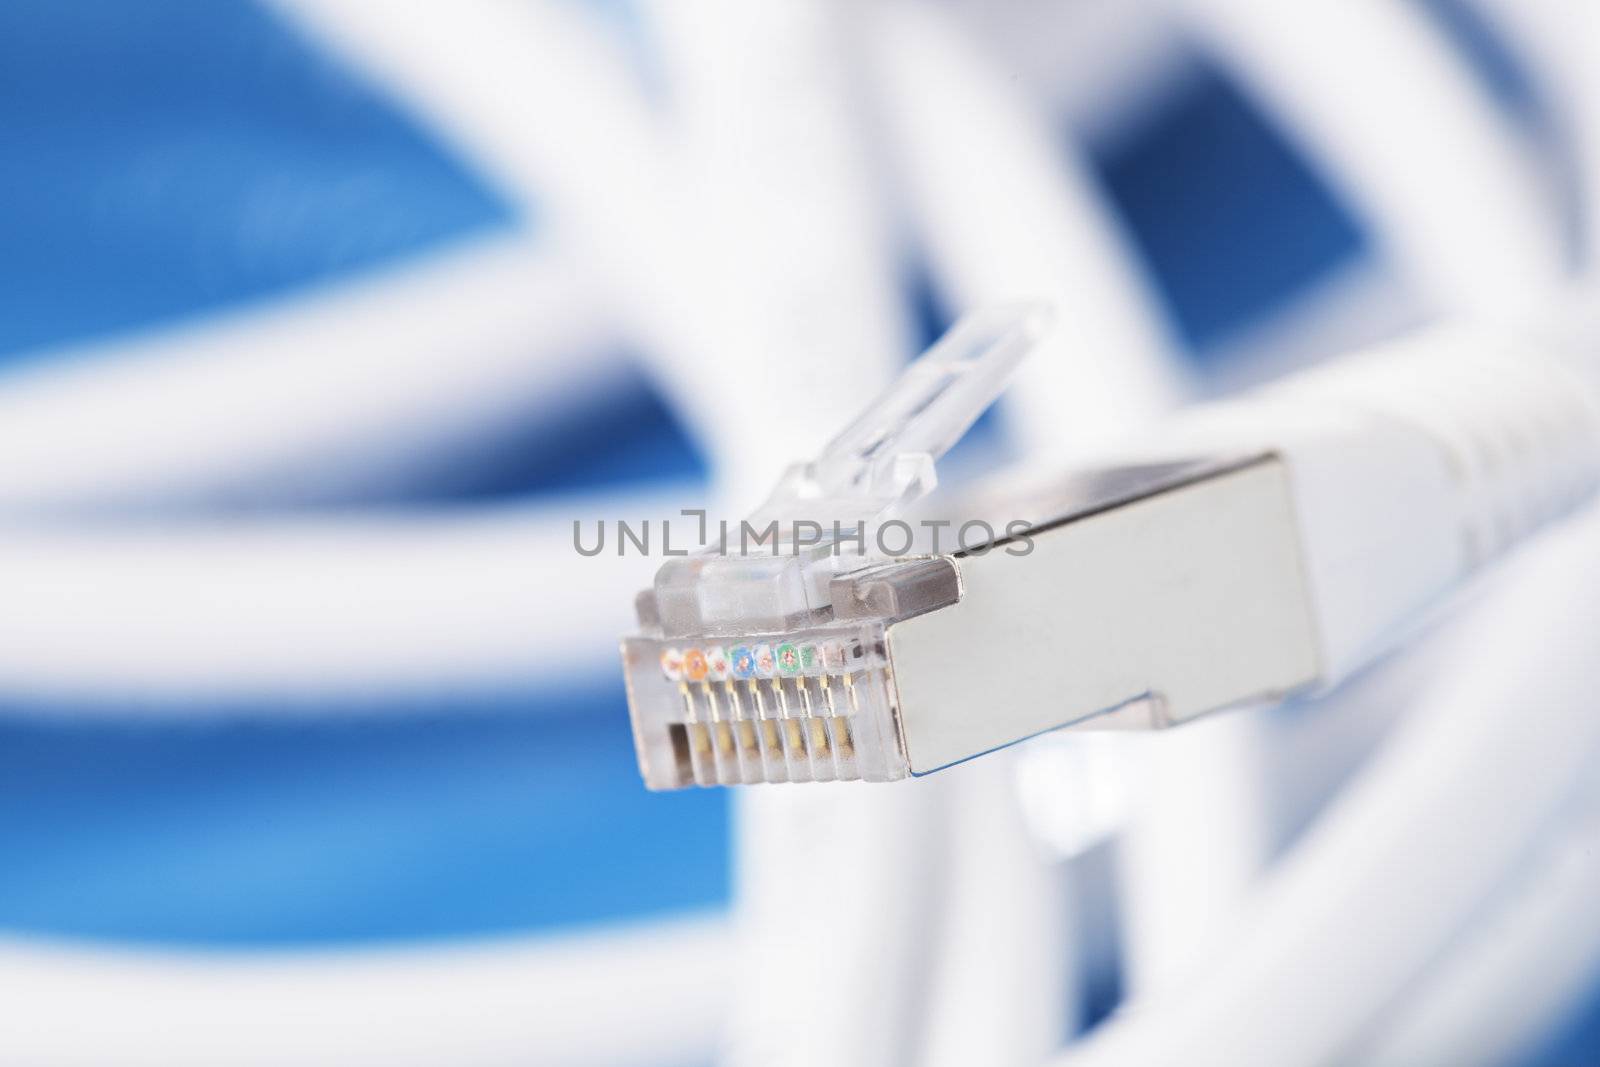 Ethernet connector by Stocksnapper